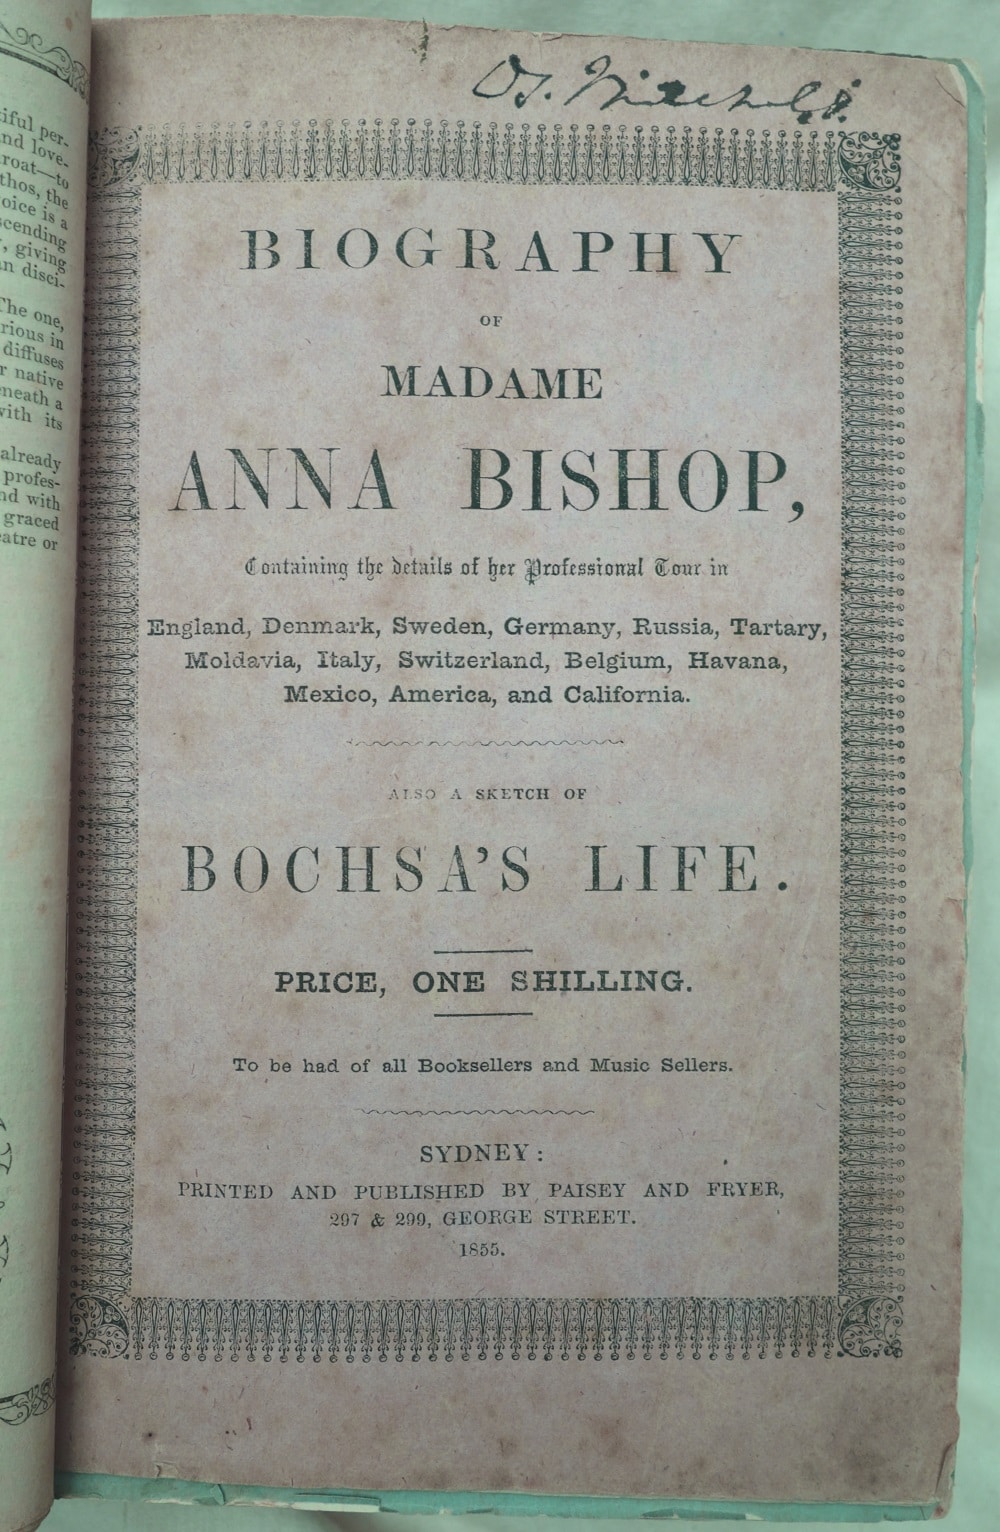 David Mitchell's copy of Biography of Madame Anna Bishop, State Library of New South Wales